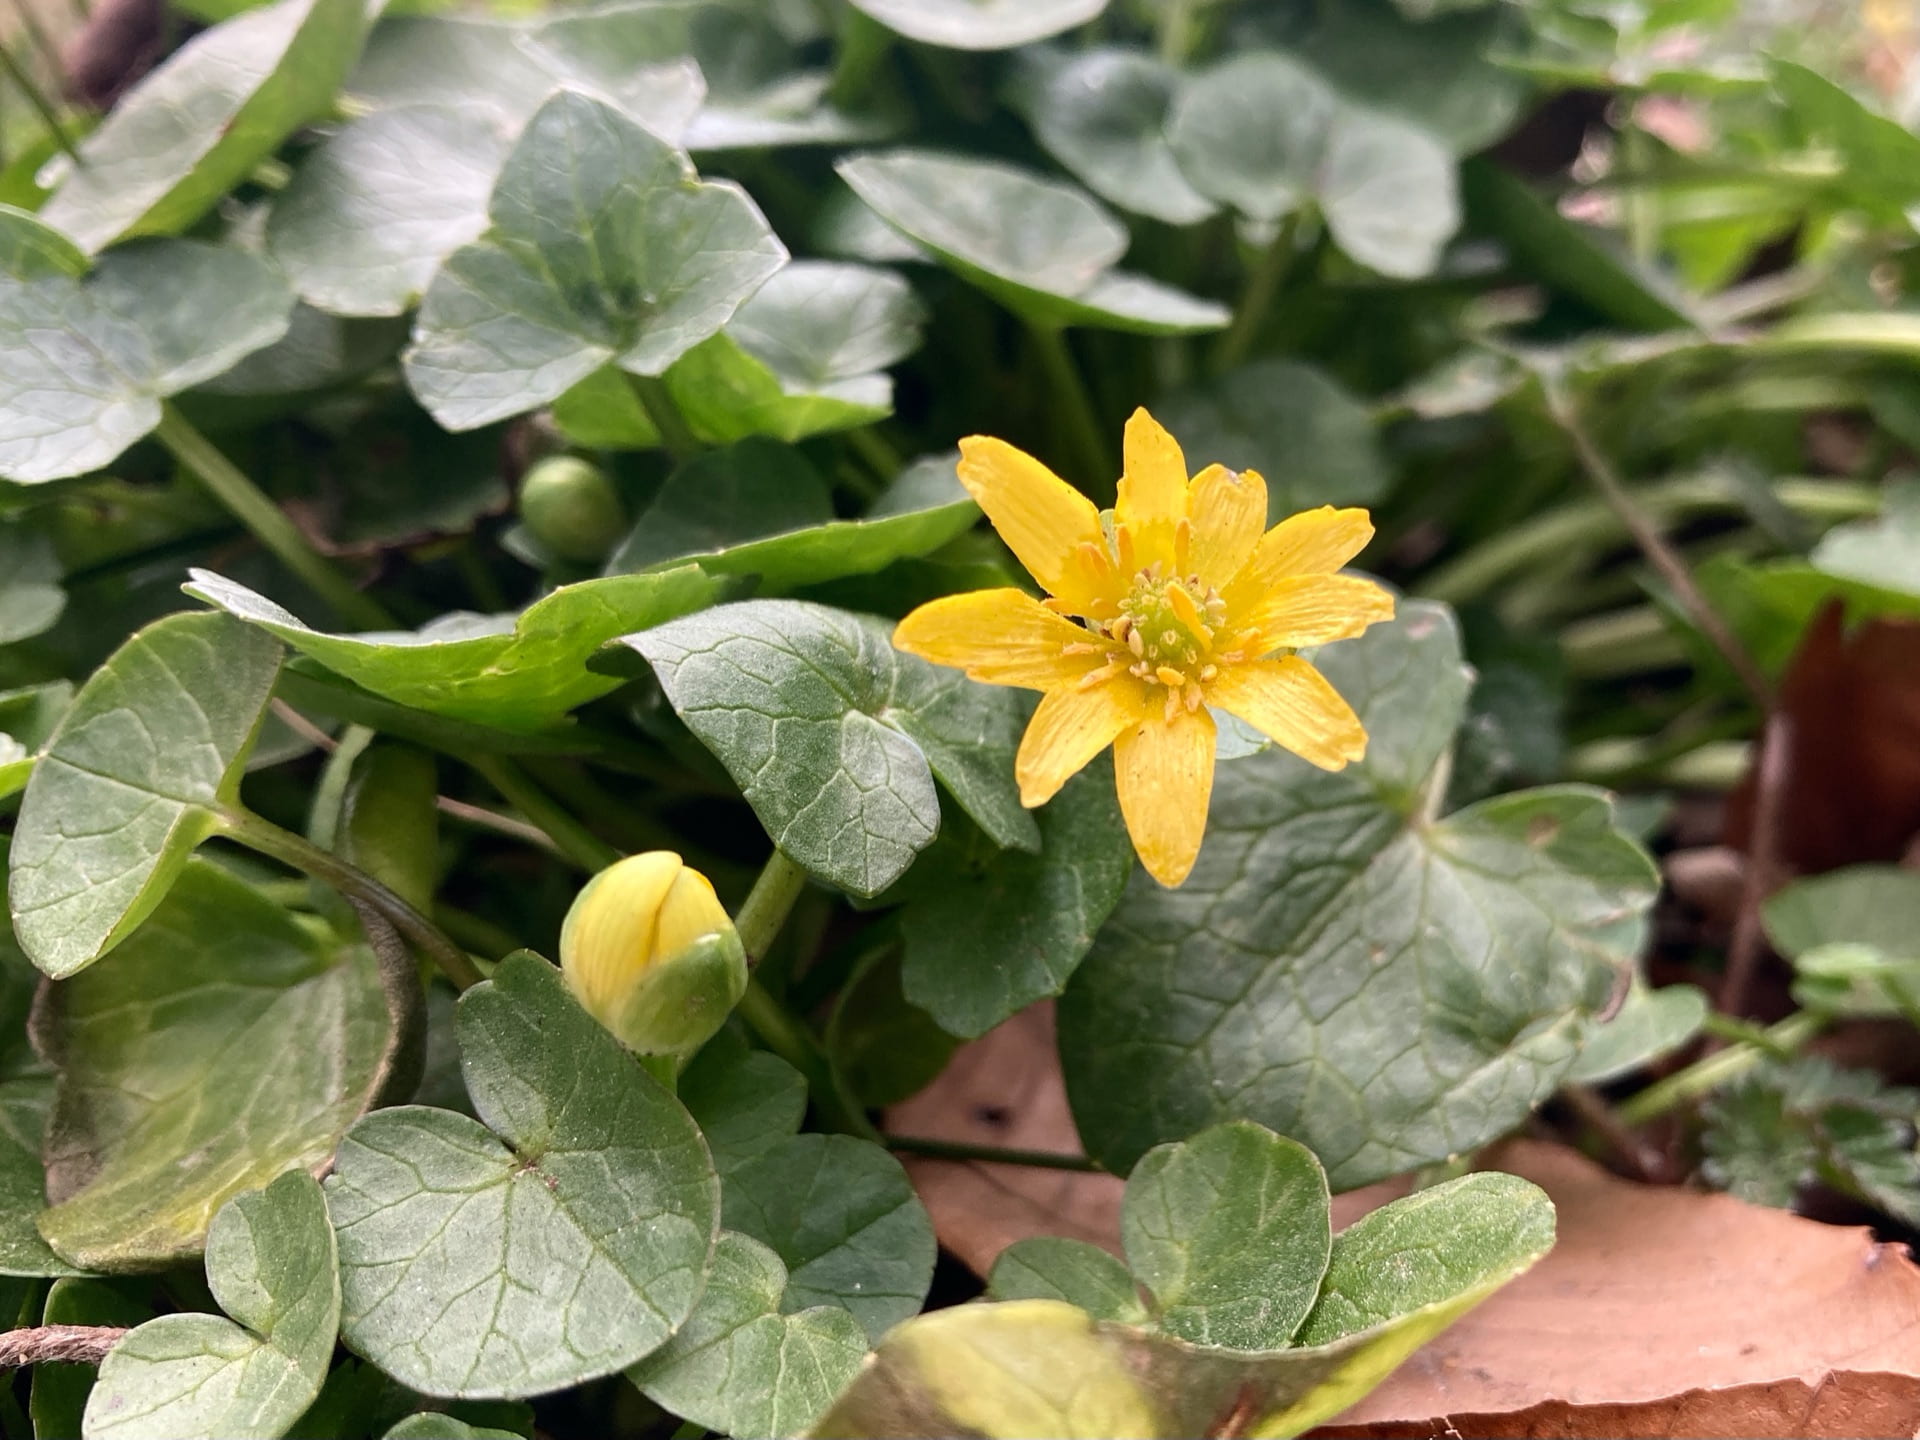 Ficaria verna, also known as lesser celandine, is an introduced invasive species that, unfortunately, thrives in the moist soils of the park.